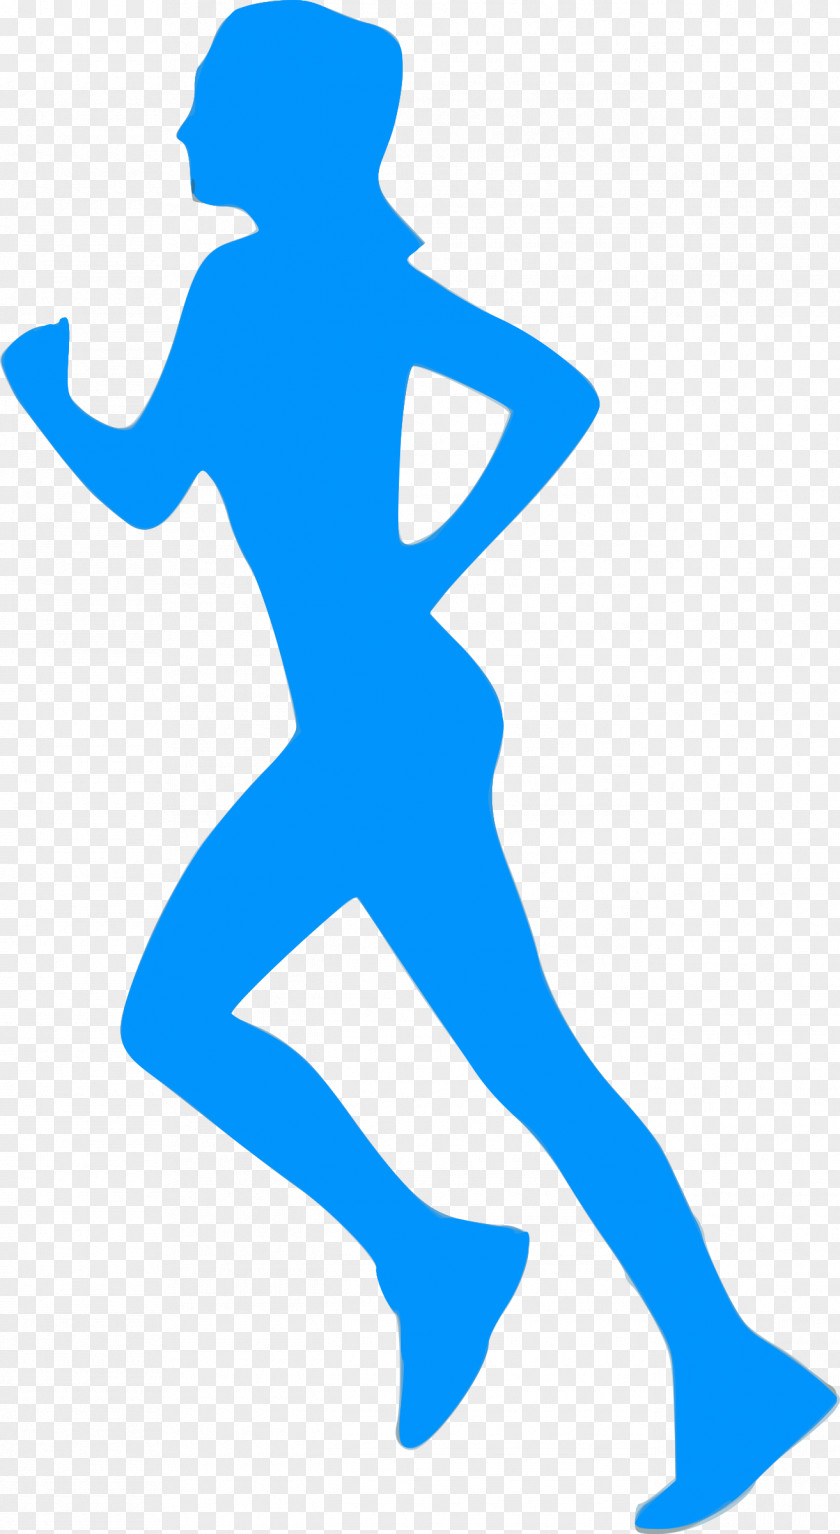 Extreme Sports Silhouettes Stoneham Run For Recovery 5K Clip Art Cross Country Running PNG